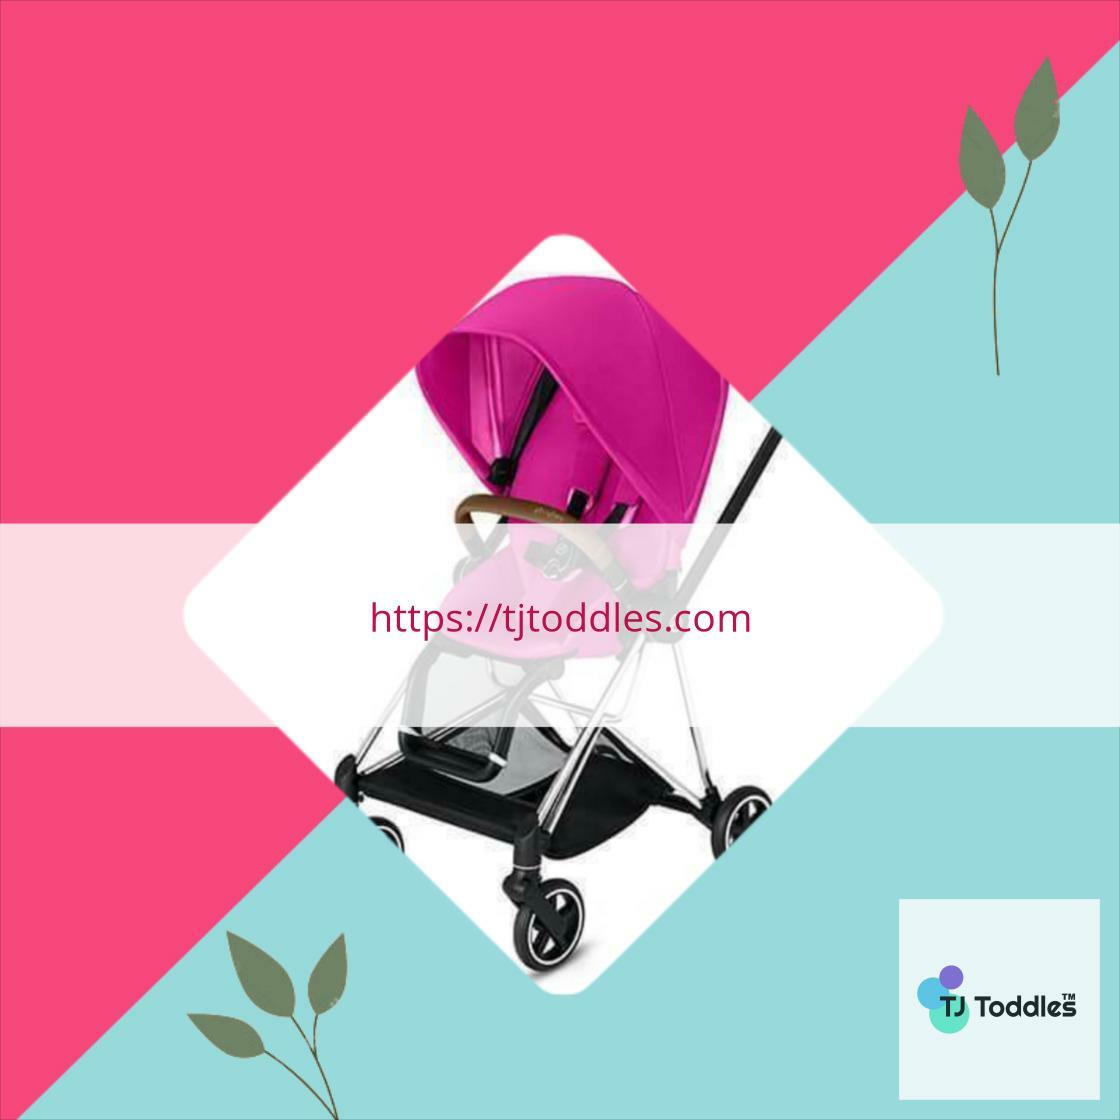 We have expanded! CYBEX Mios 3-in-1 Travel System Chrome with brown details Baby Stroller – Fancy Pink starting from $899.99 at tjtoddles.com/products/cybex… See more. 🤓 #stroller #babystroller